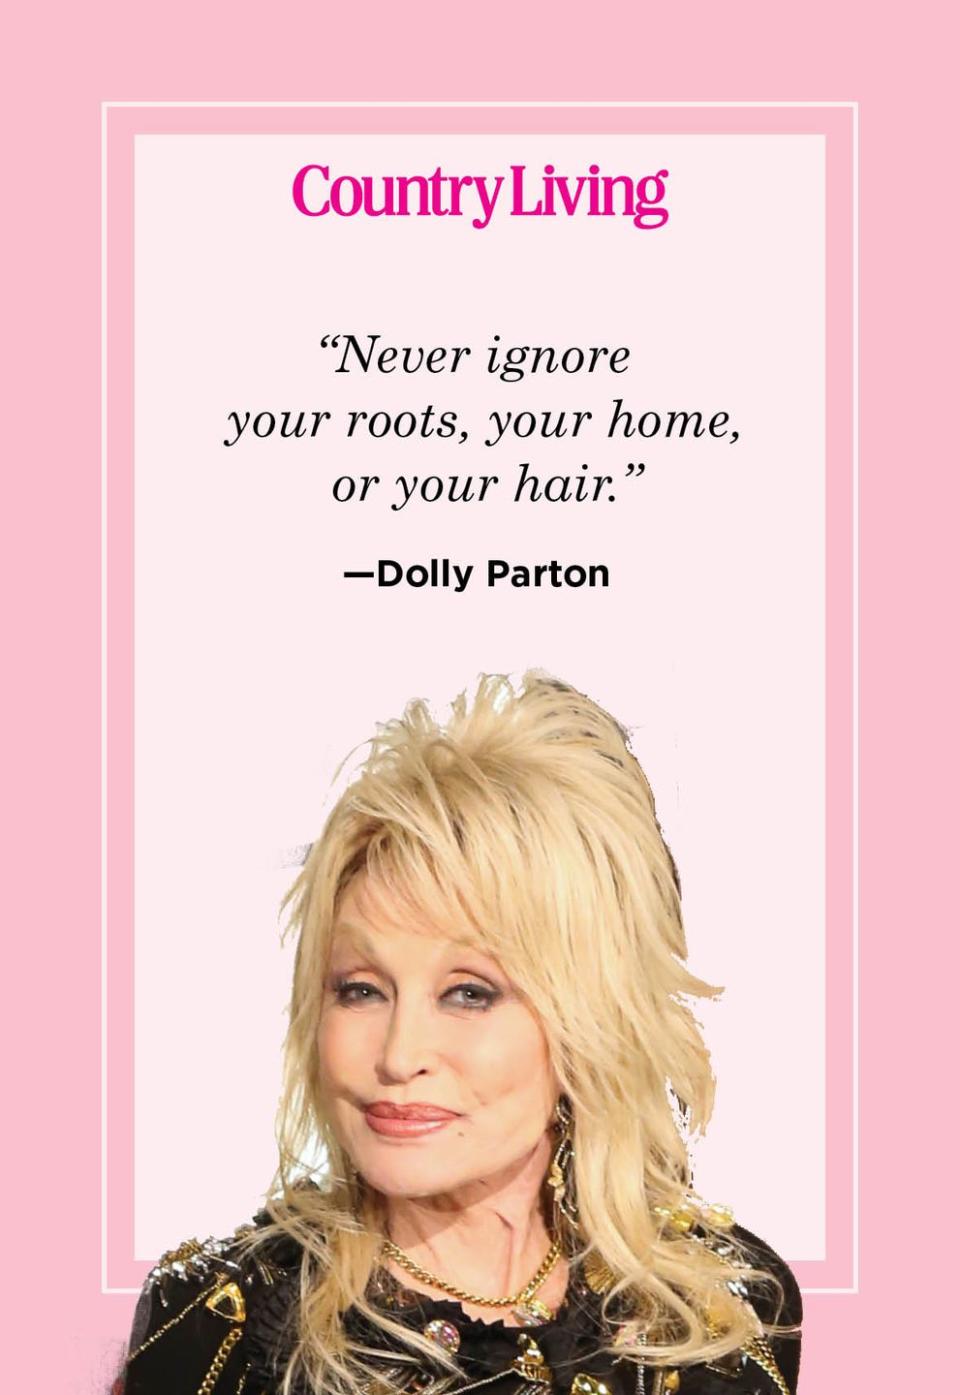 <p>“Never ignore your roots, your home, or your hair.”</p>